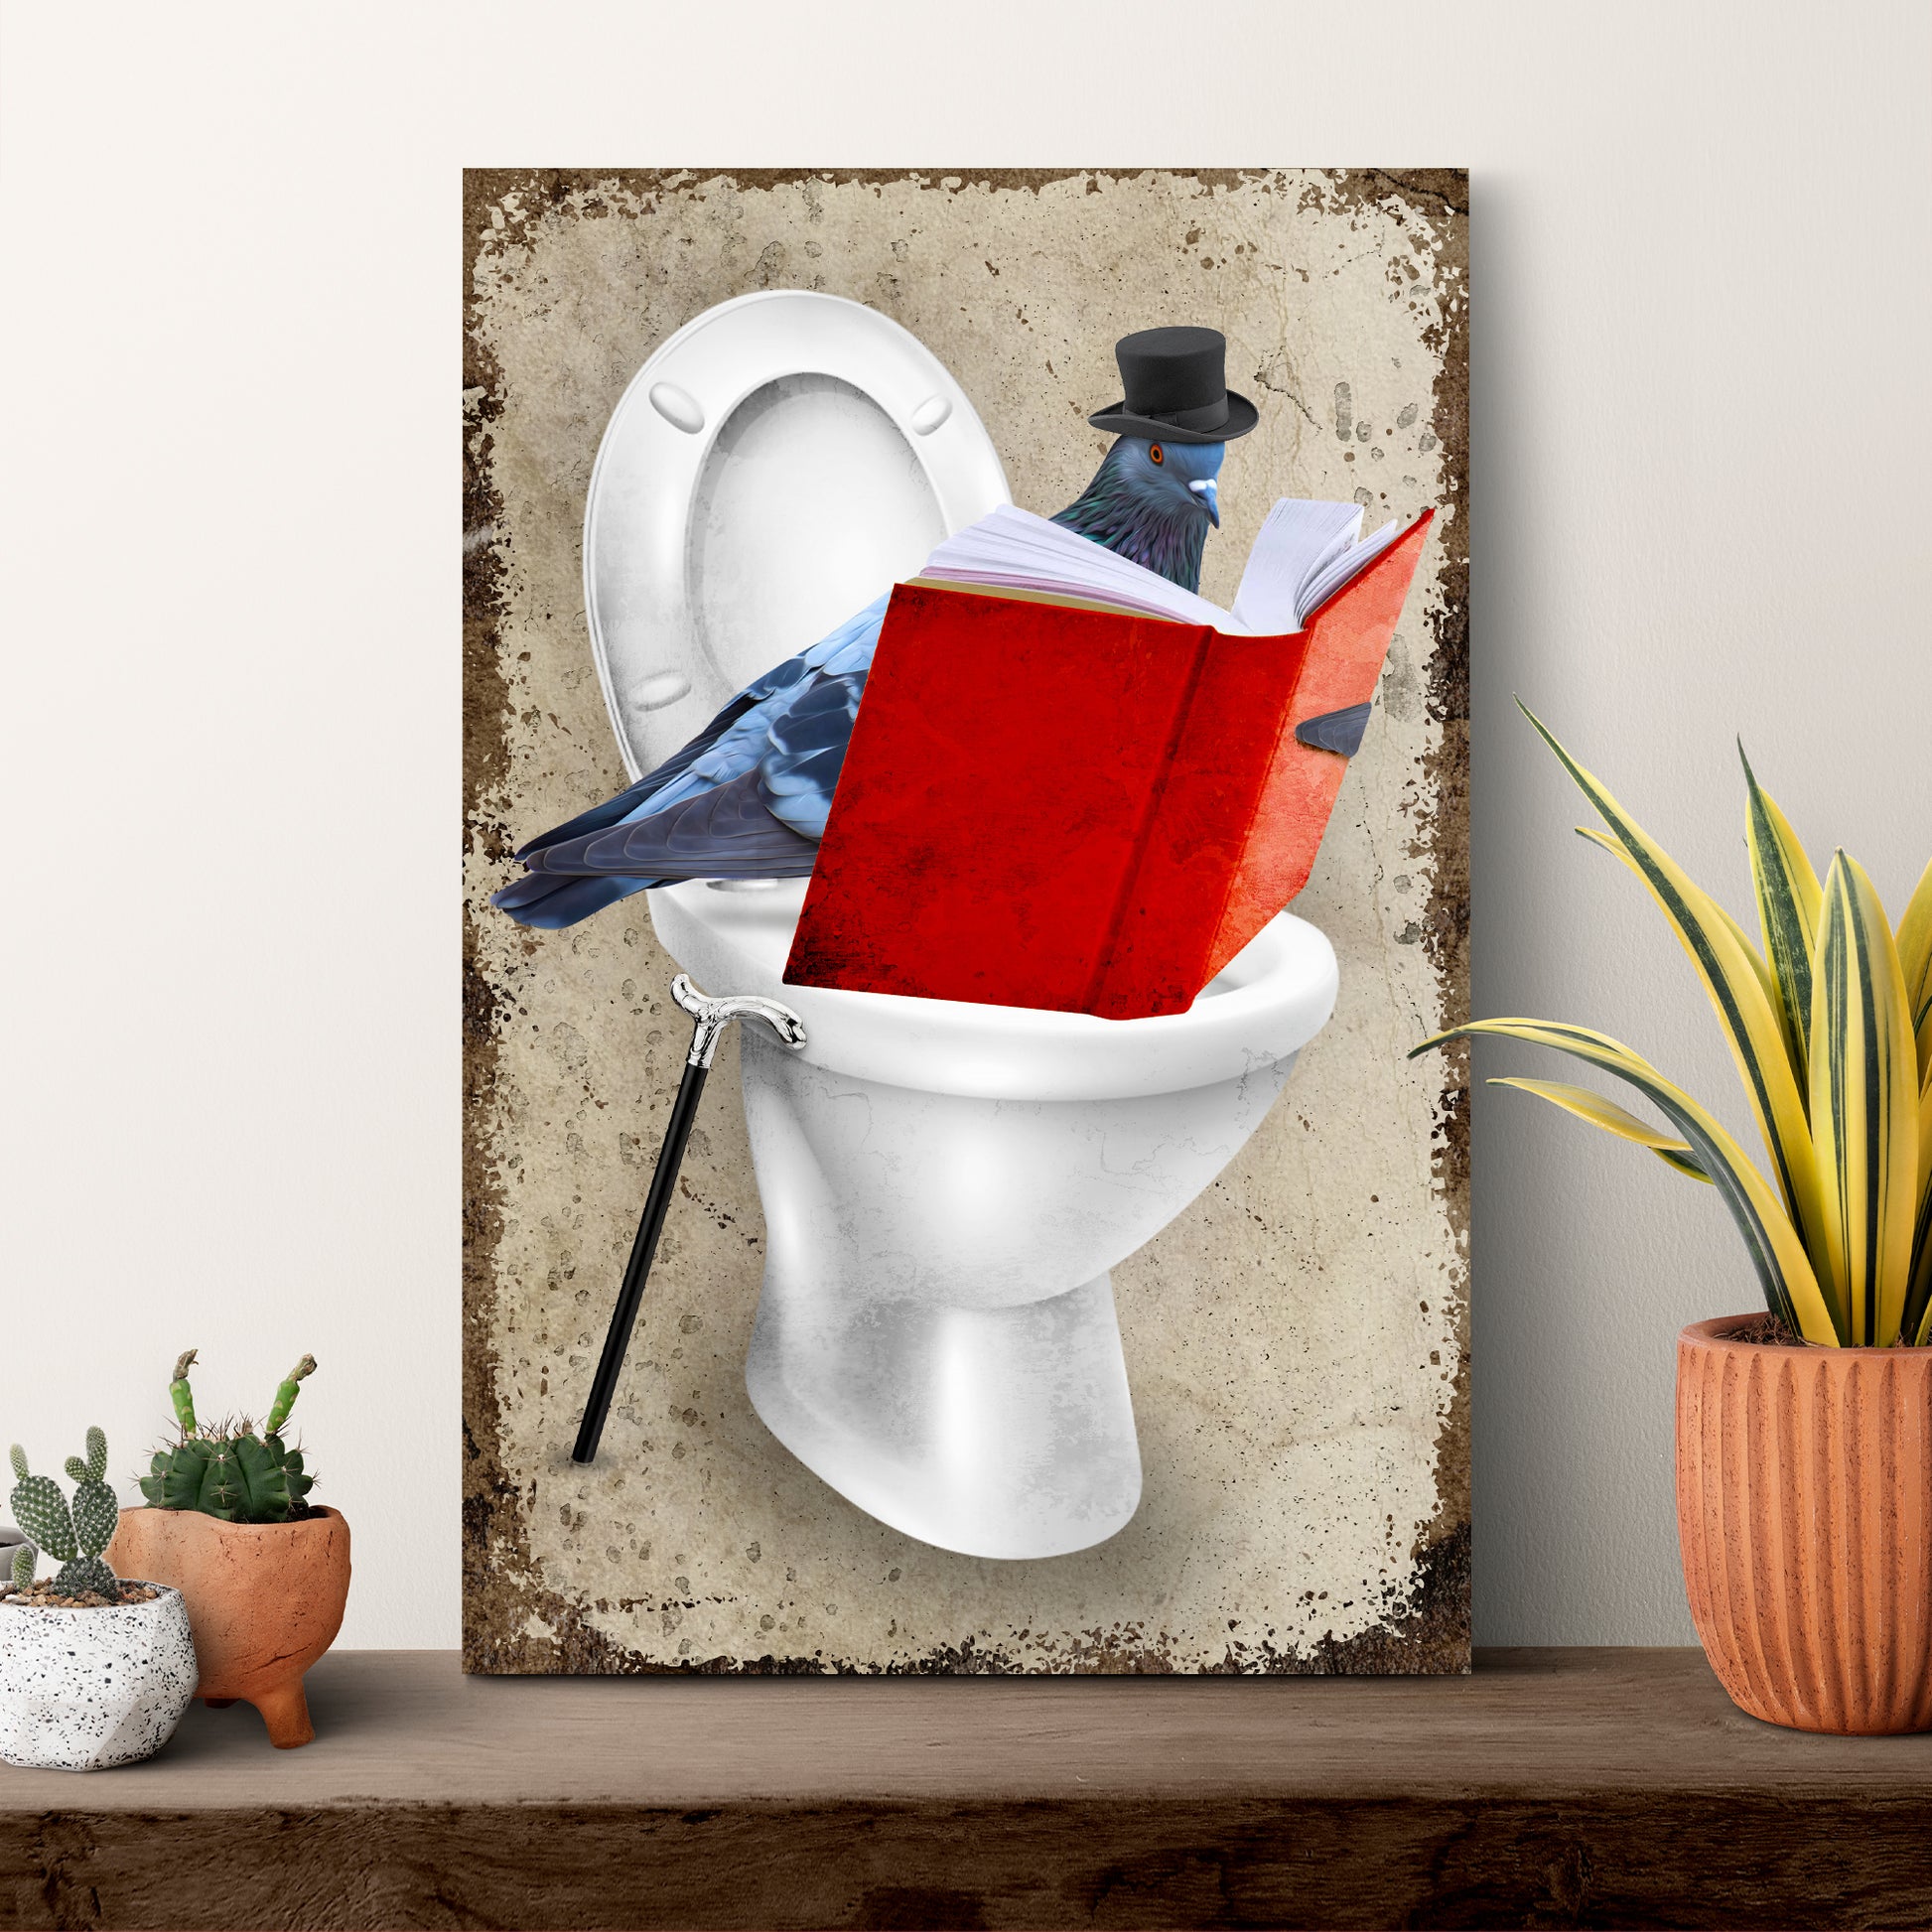 Stool Pigeon Wall Art Style 1 - Image by Tailored Canvases